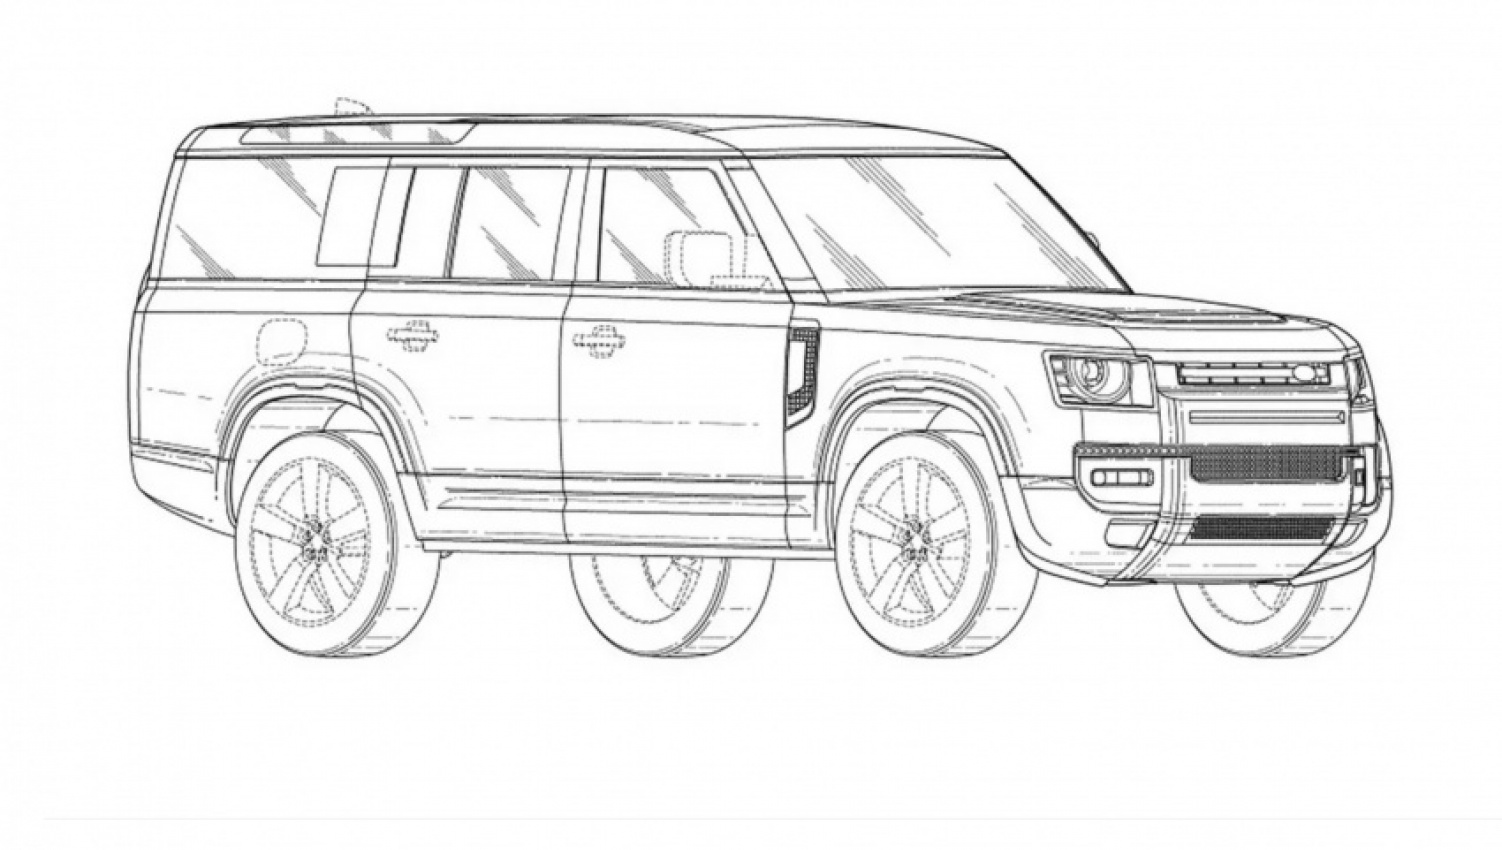 4x4, autos, cars, land rover, news, four-wheel-drive, land rover defender, land rover defender 130 design shown in new patent images